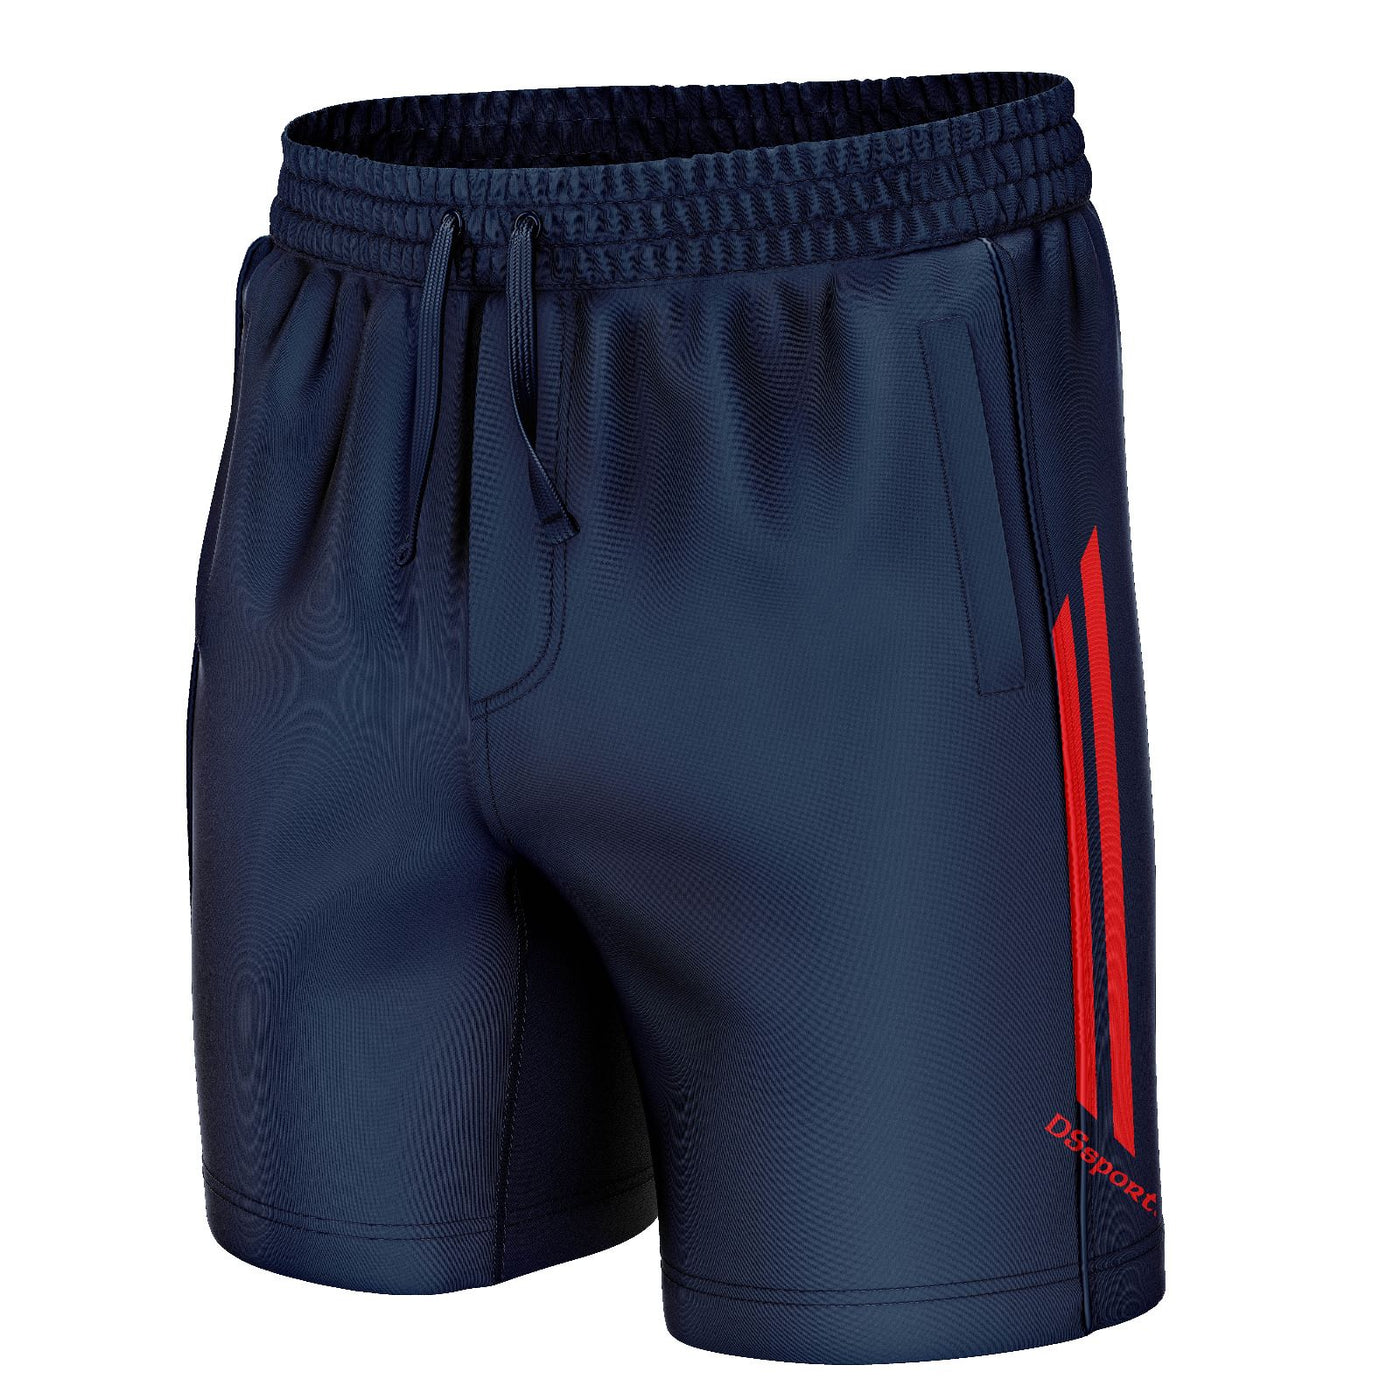 Leisure Shorts- Navy and Red